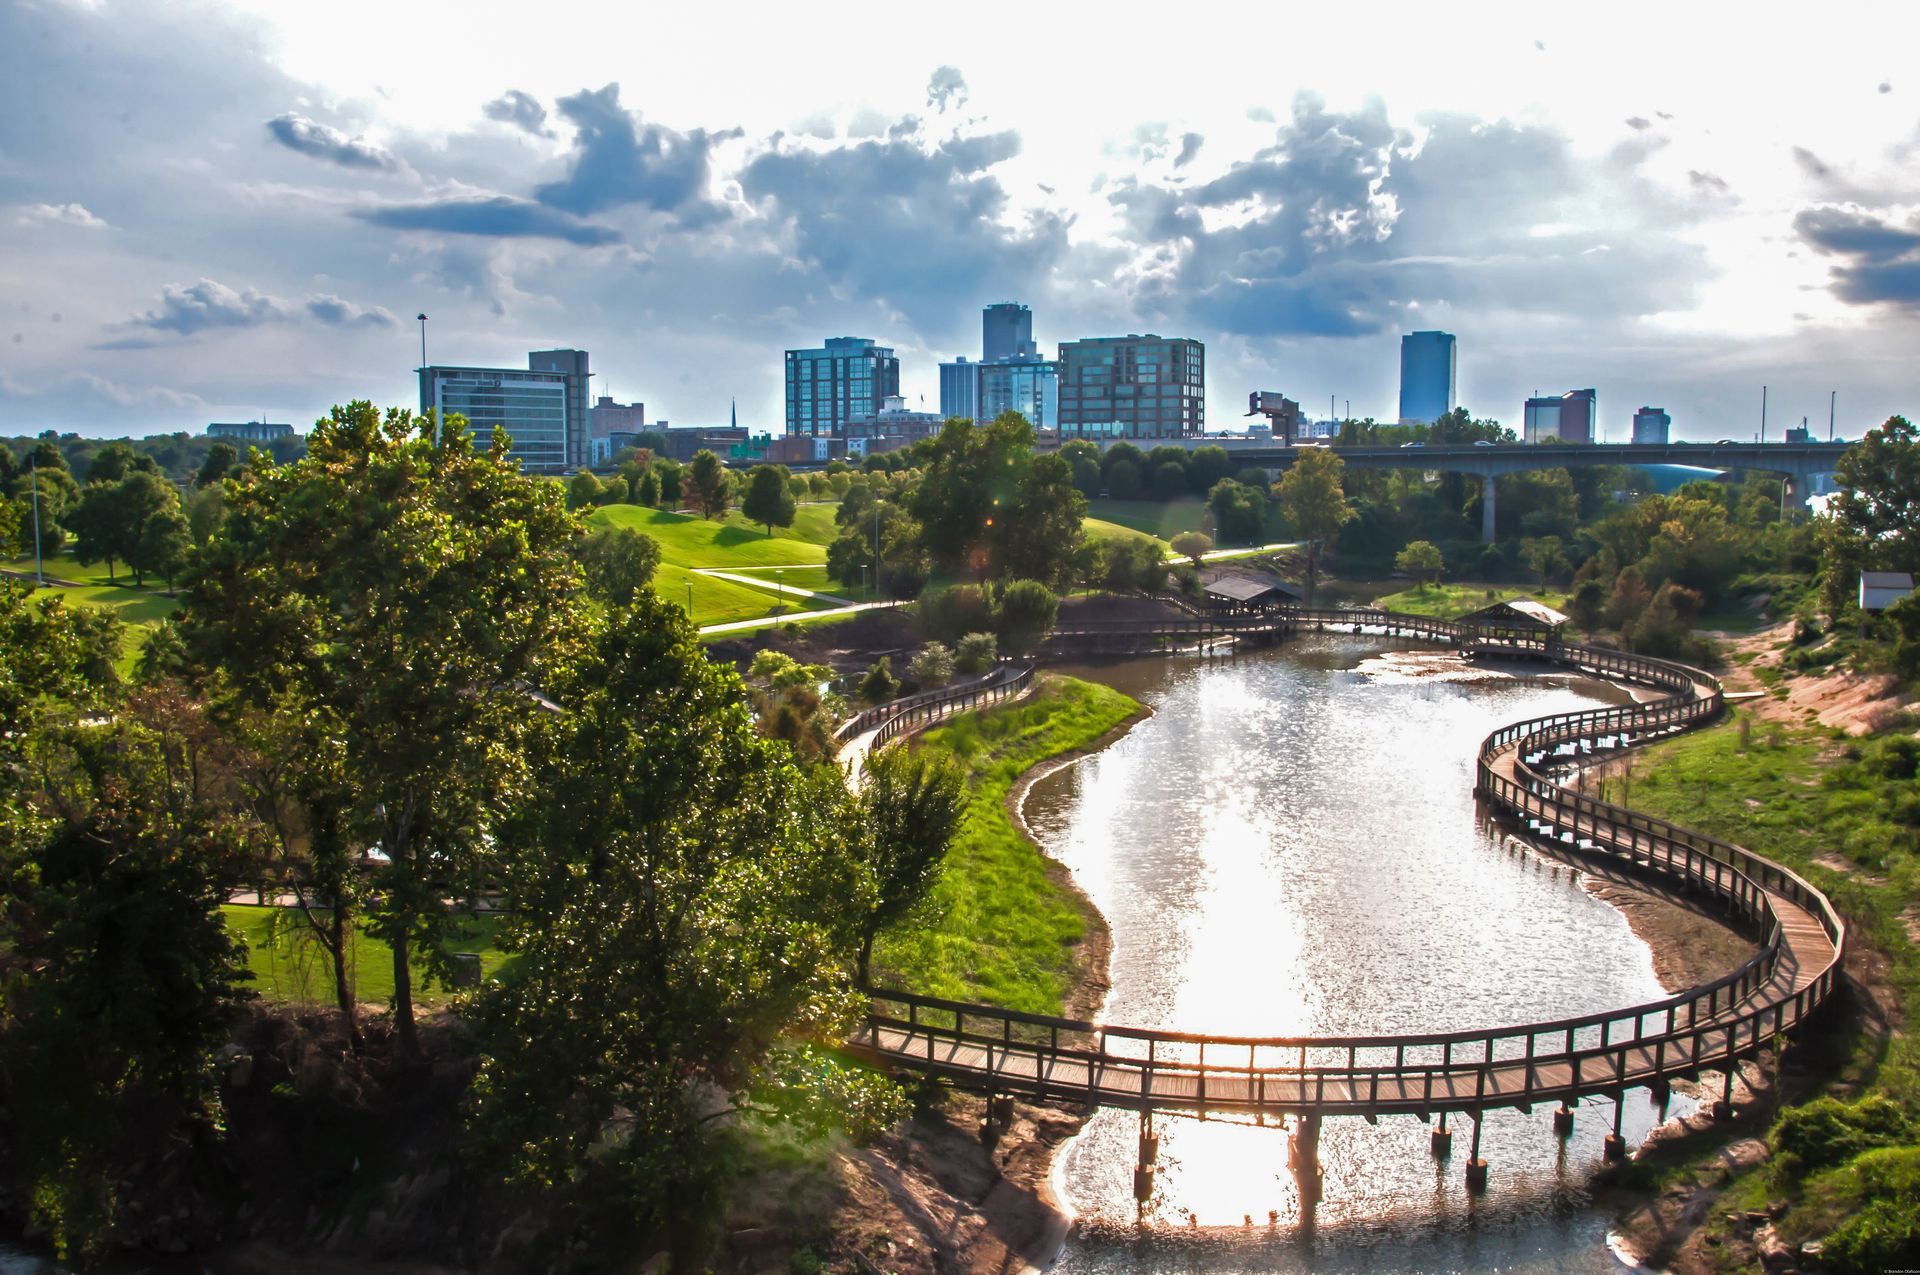 A bridge over a river in a park with a city in the background